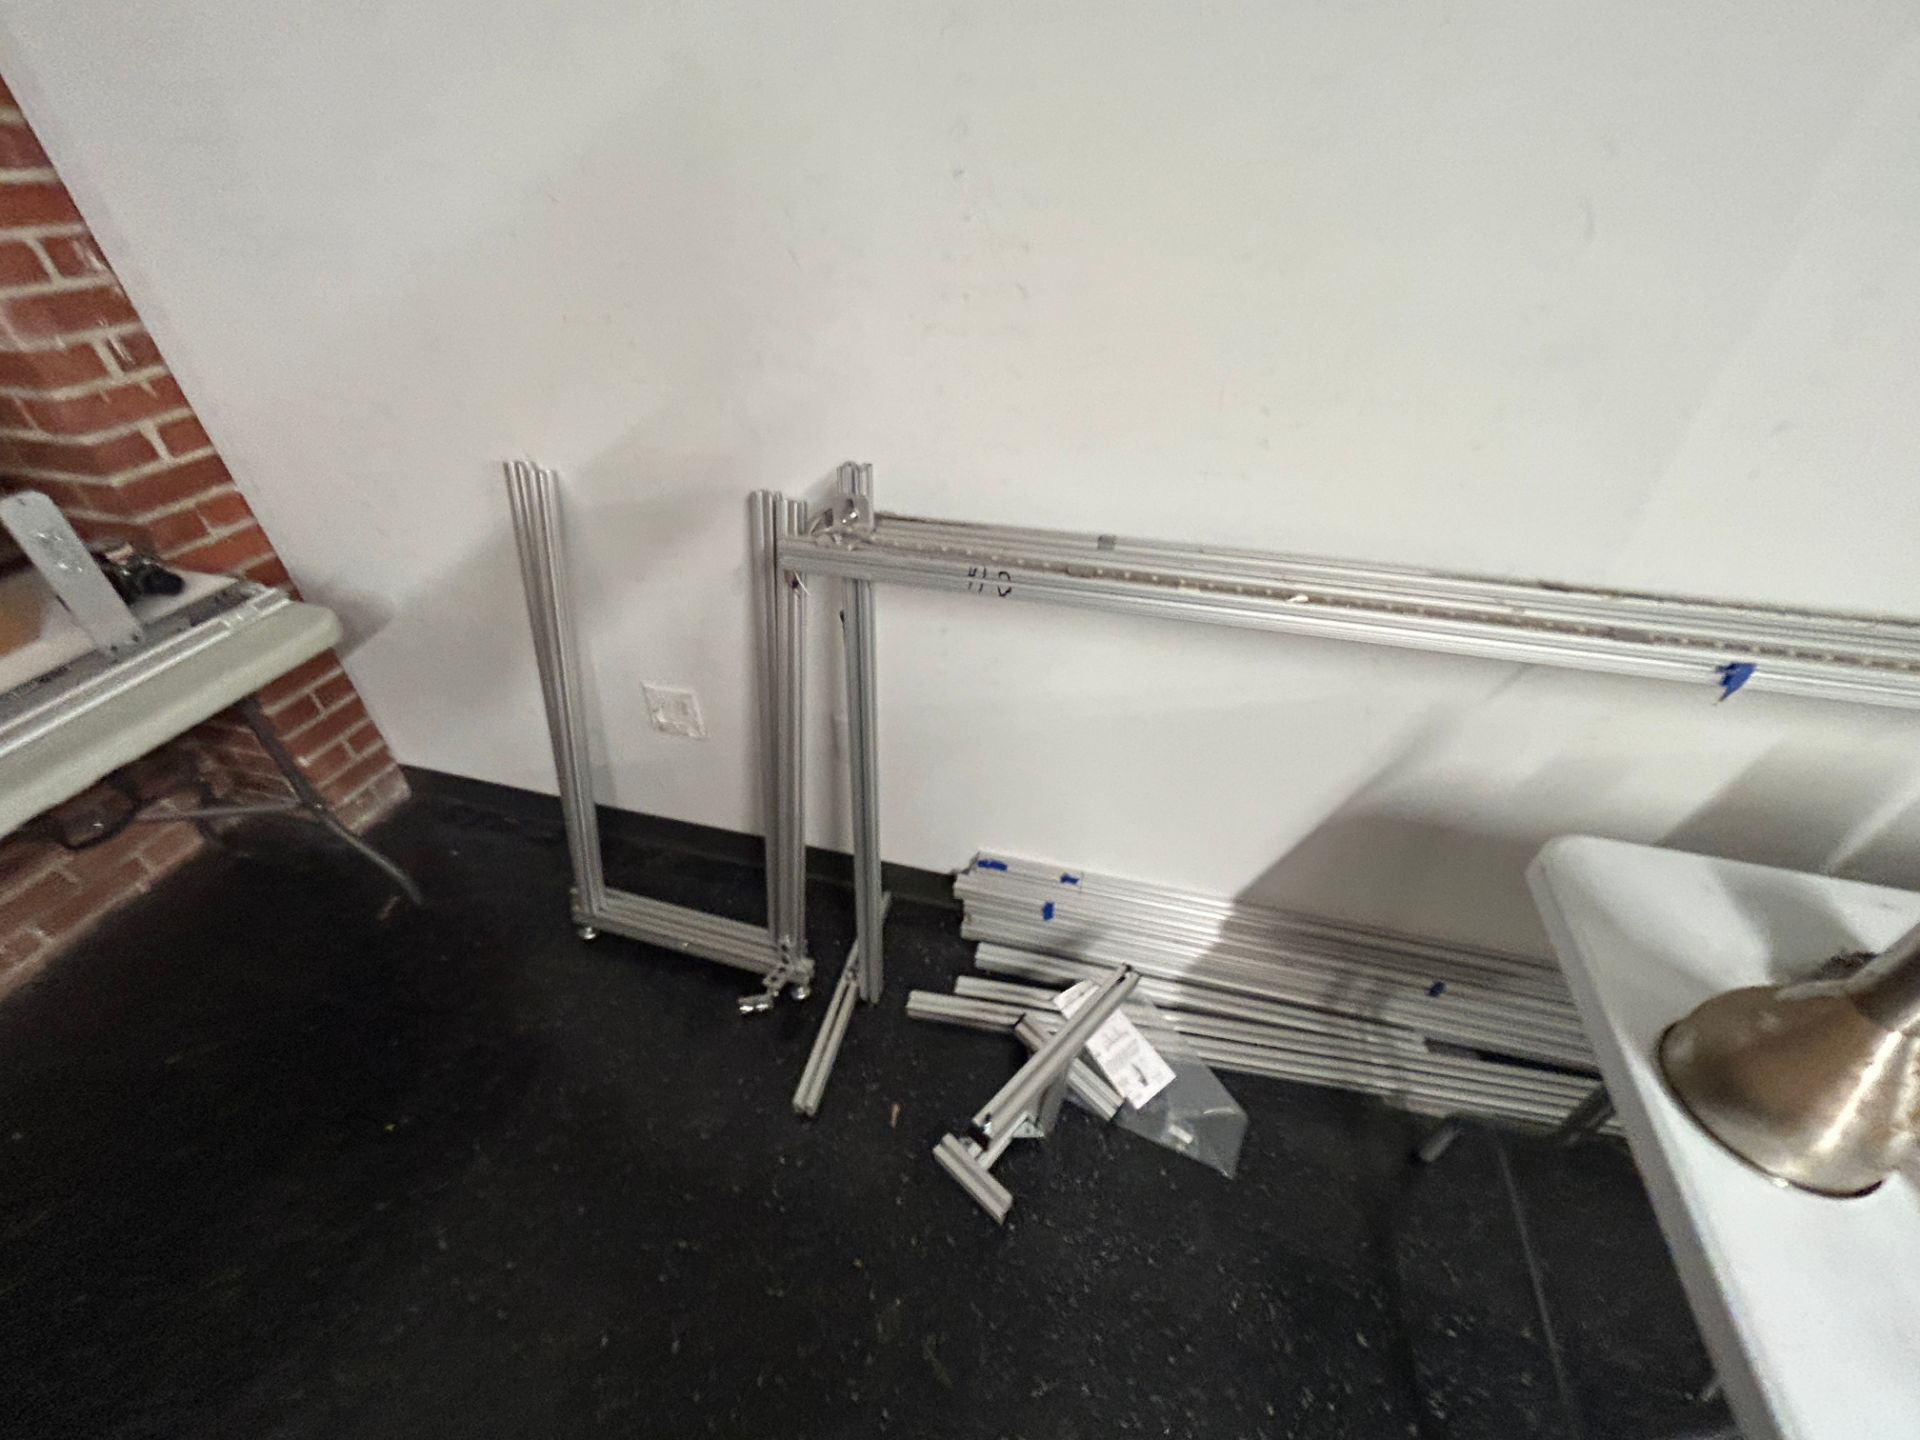 Lot - Including a Complete Adjustable Flat Belt Conveyor and Misc. Additional Parts, Connections, To - Image 2 of 7